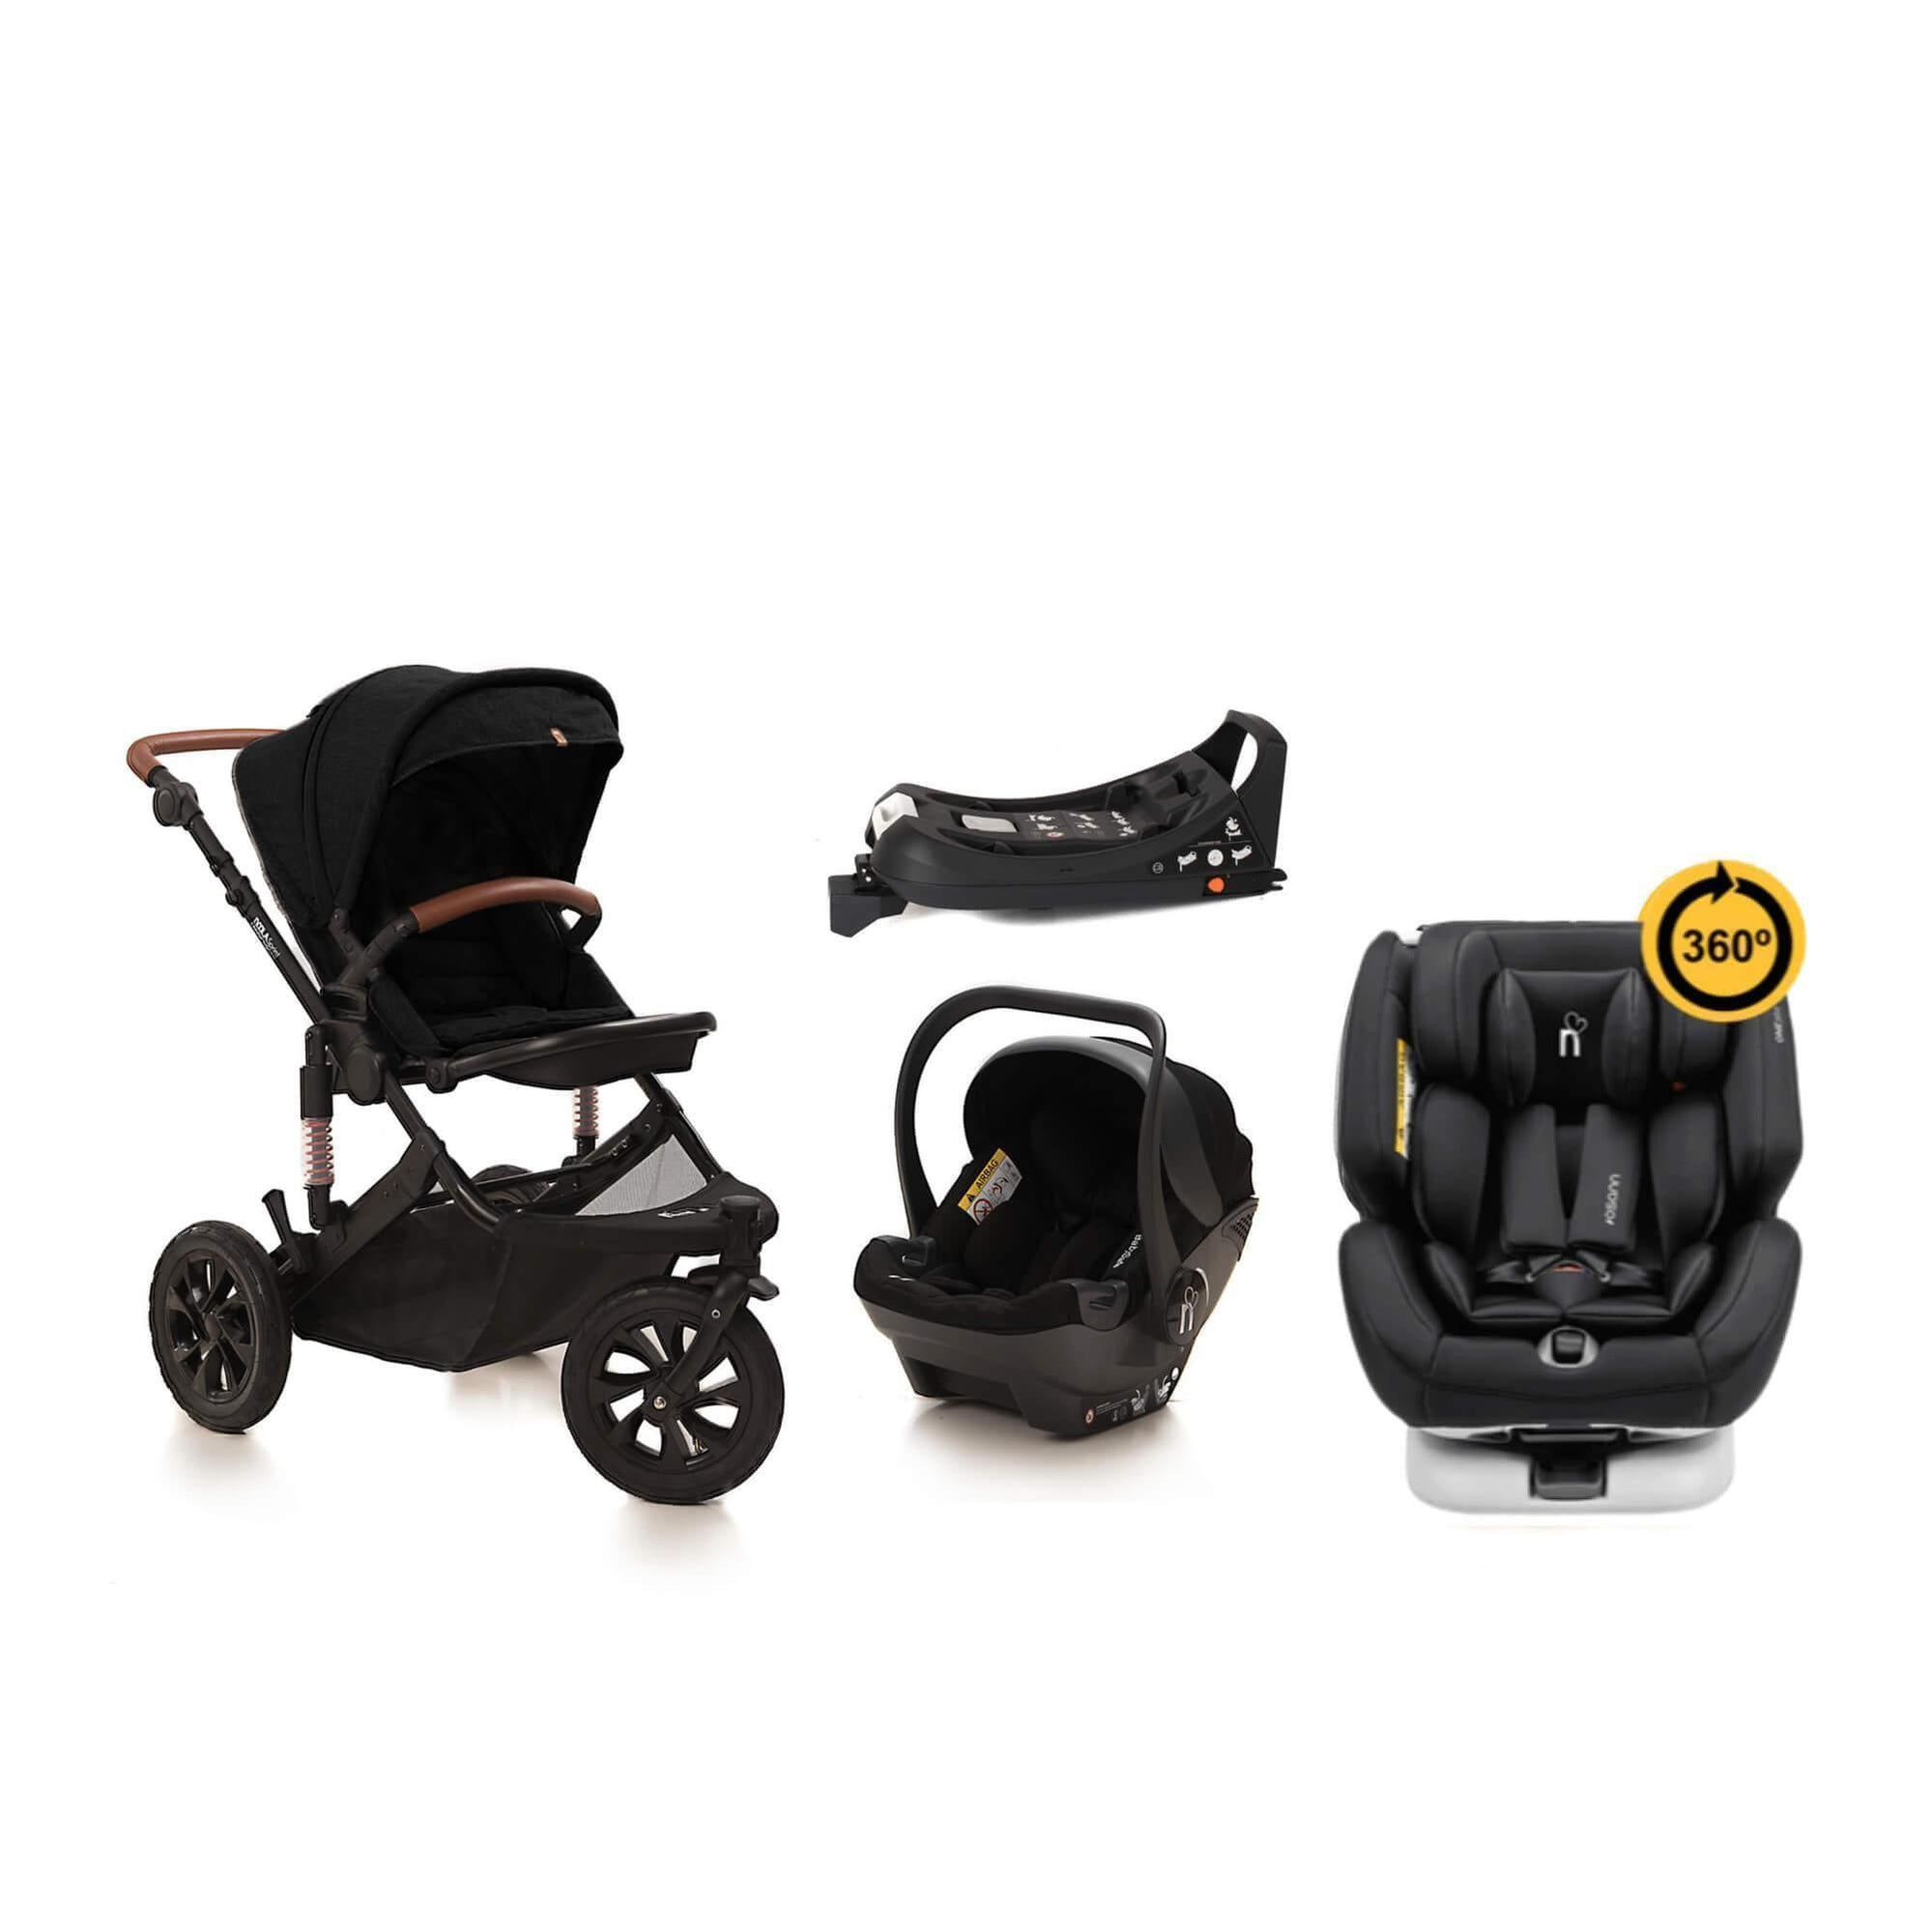 noola sprint 5in1 midnight black travel system baby stroller #SELECT THE COLOUR OF YOUR ONE360_ONE360 | MIDNIGHT BLACK